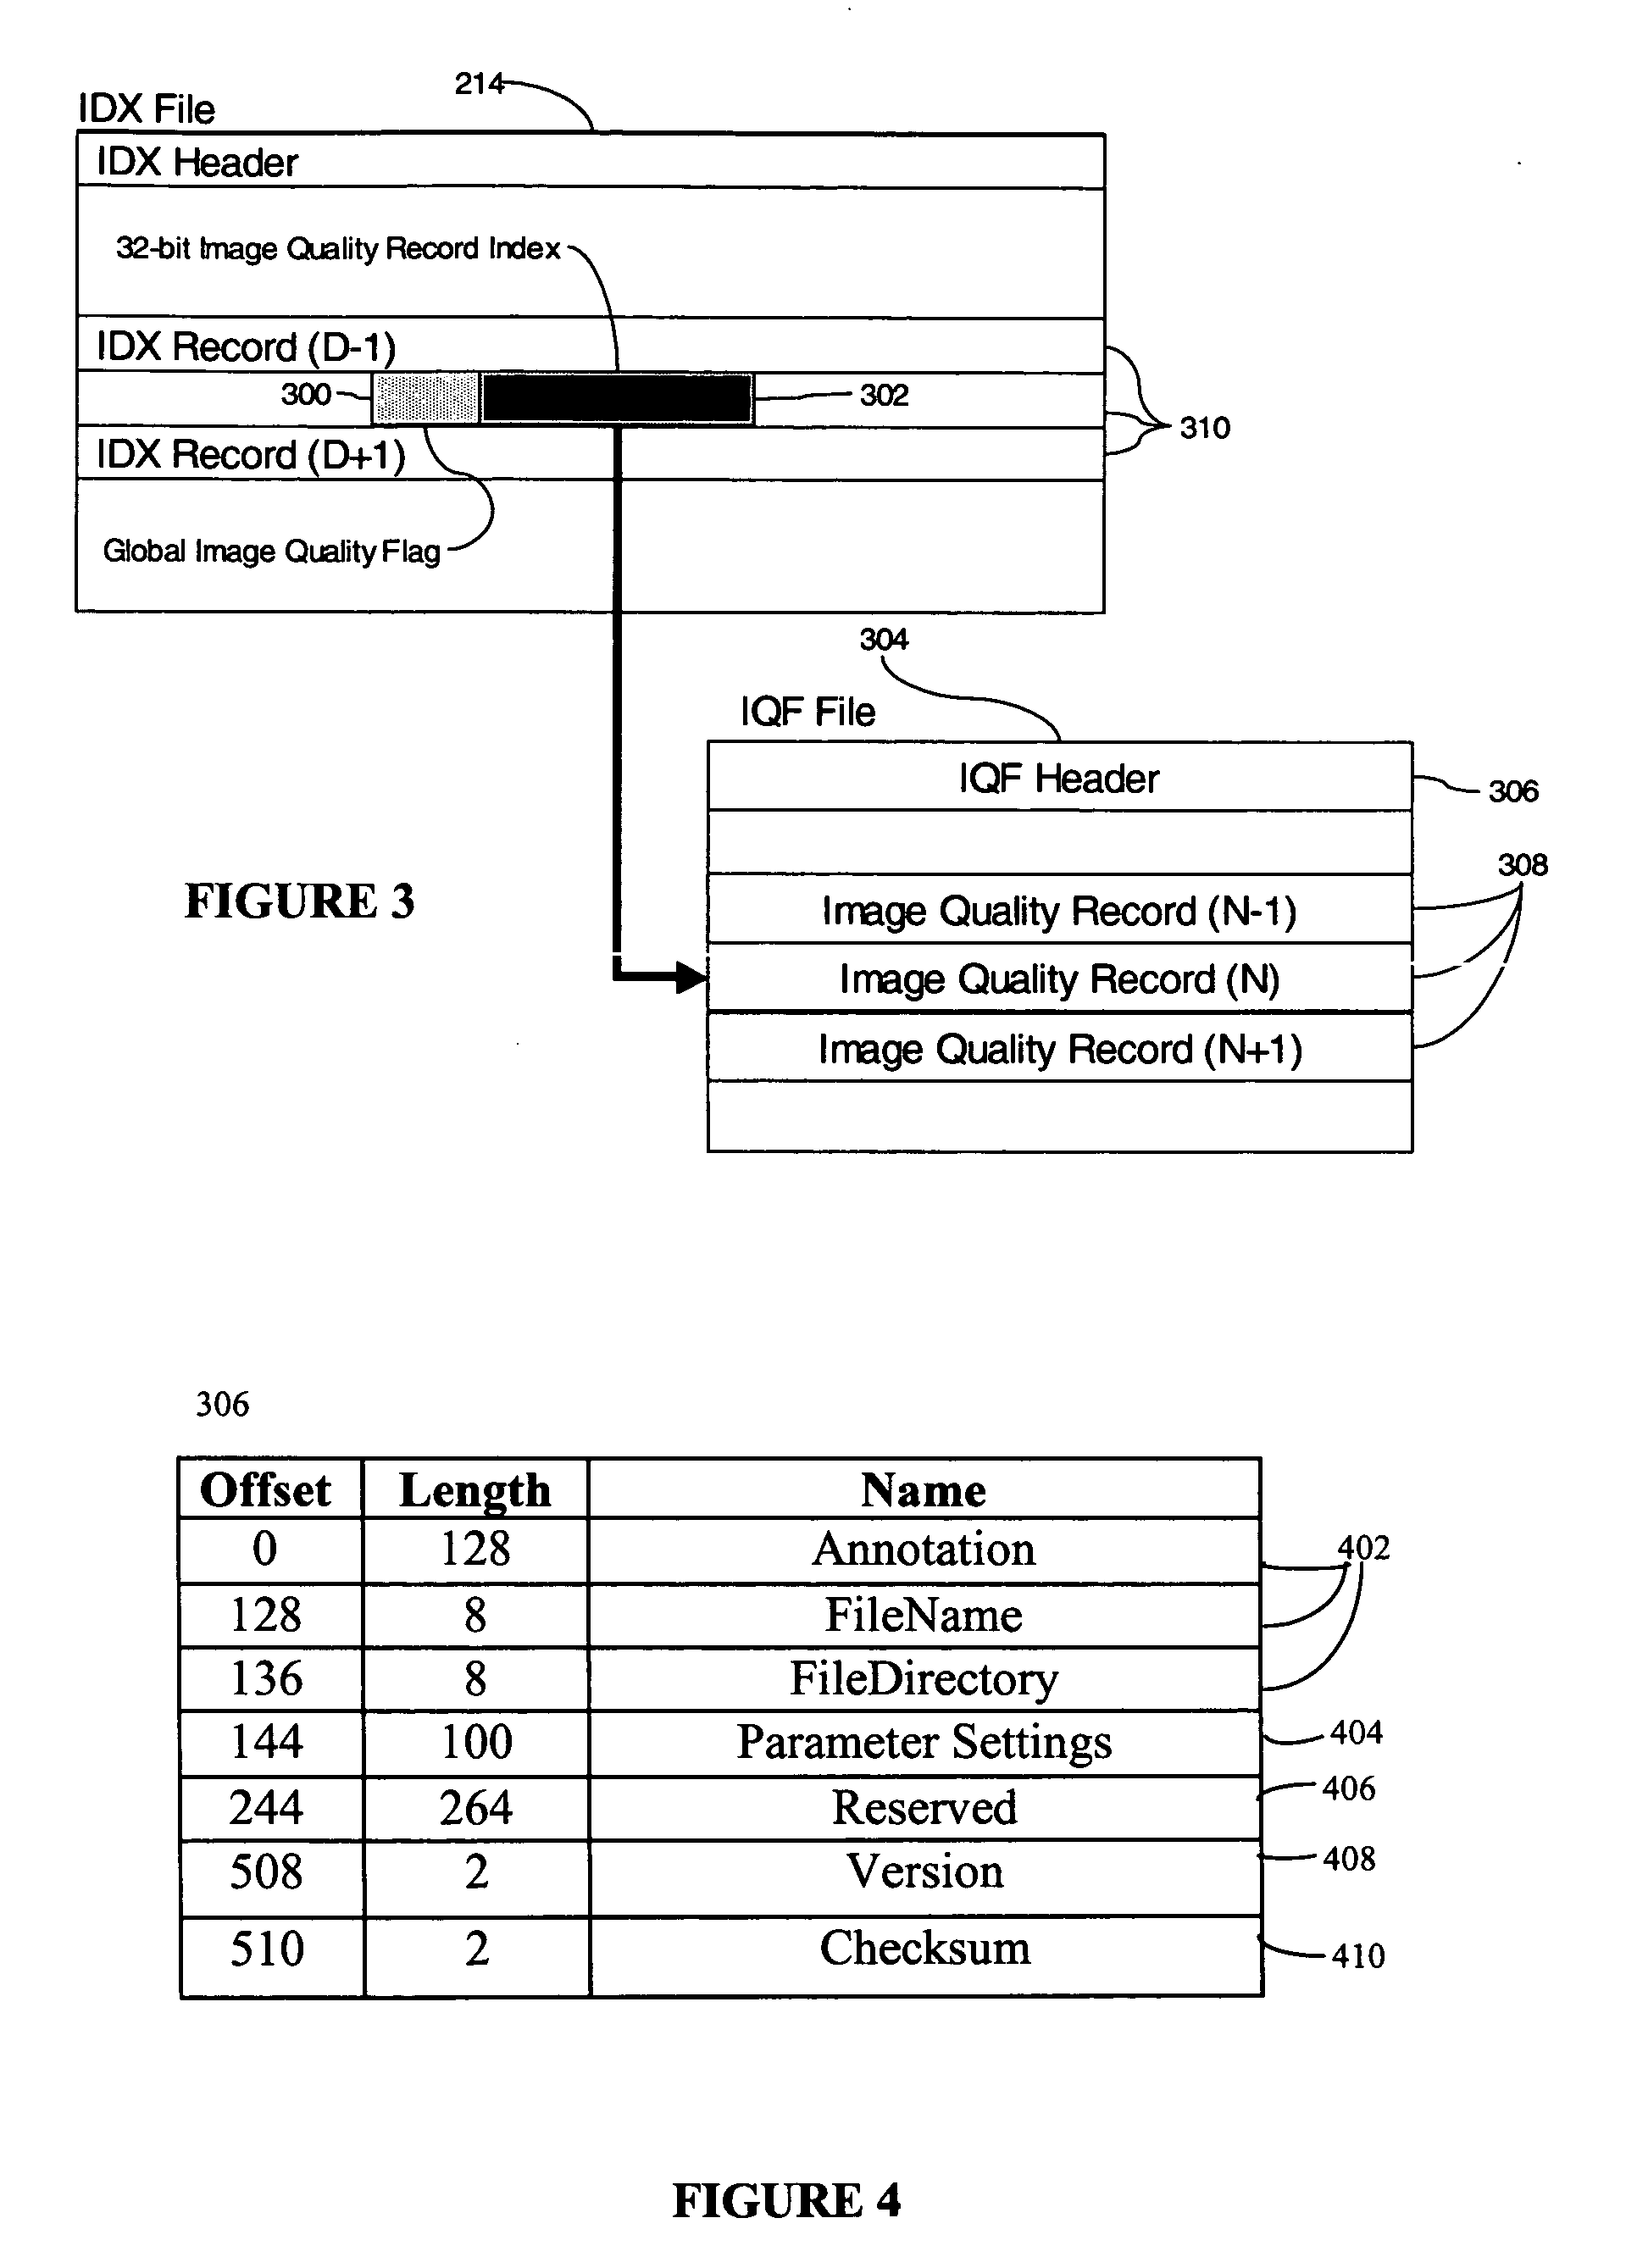 Image quality assurance system and methodologies in a post-image capture document processing environment